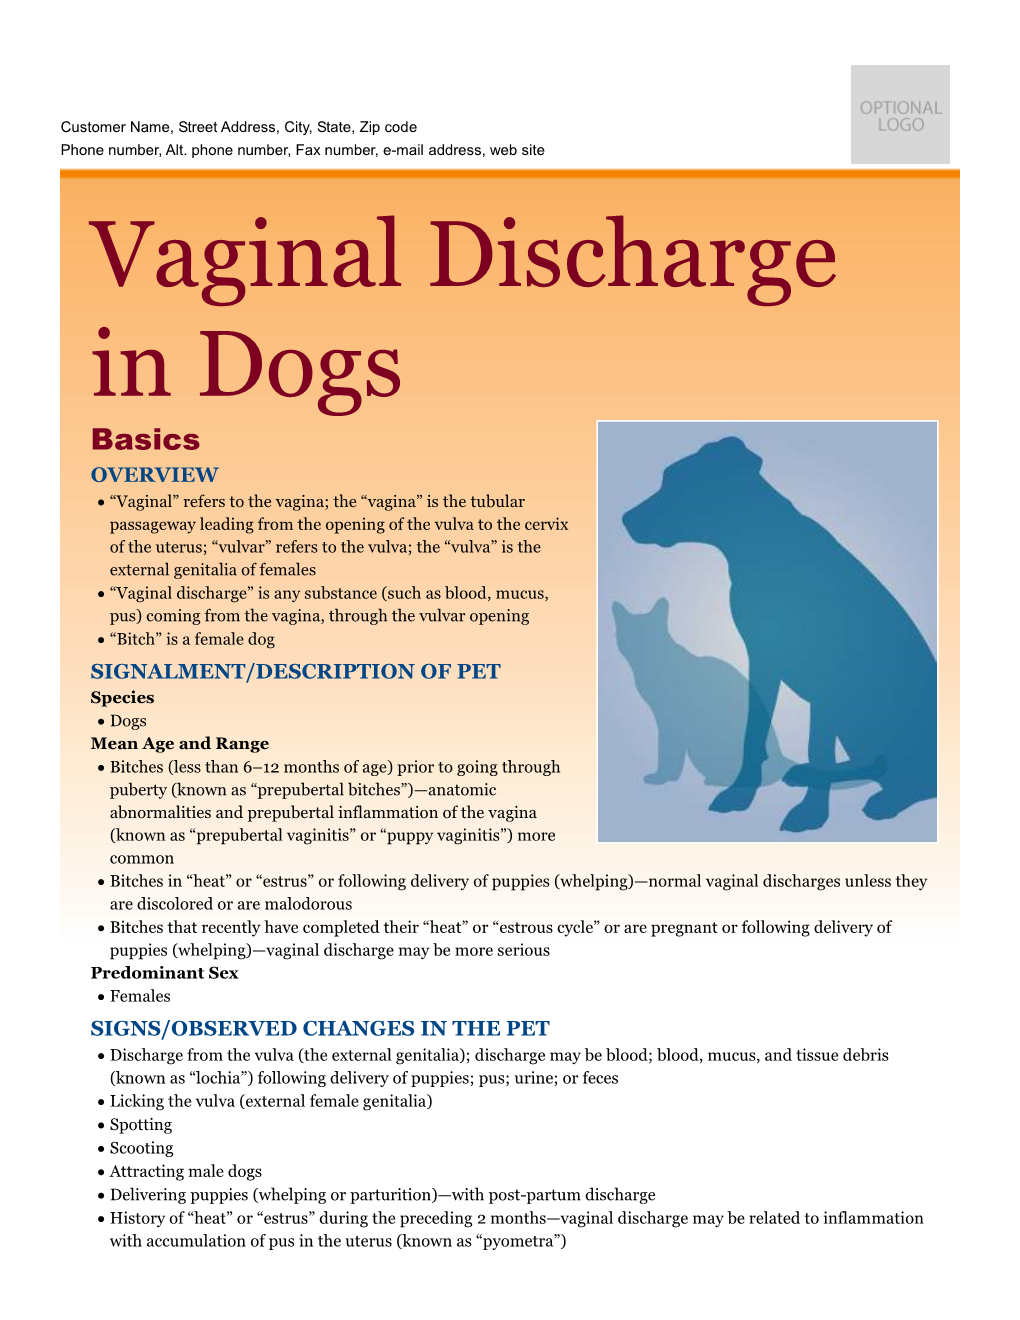 Vaginal Discharge in Dogs